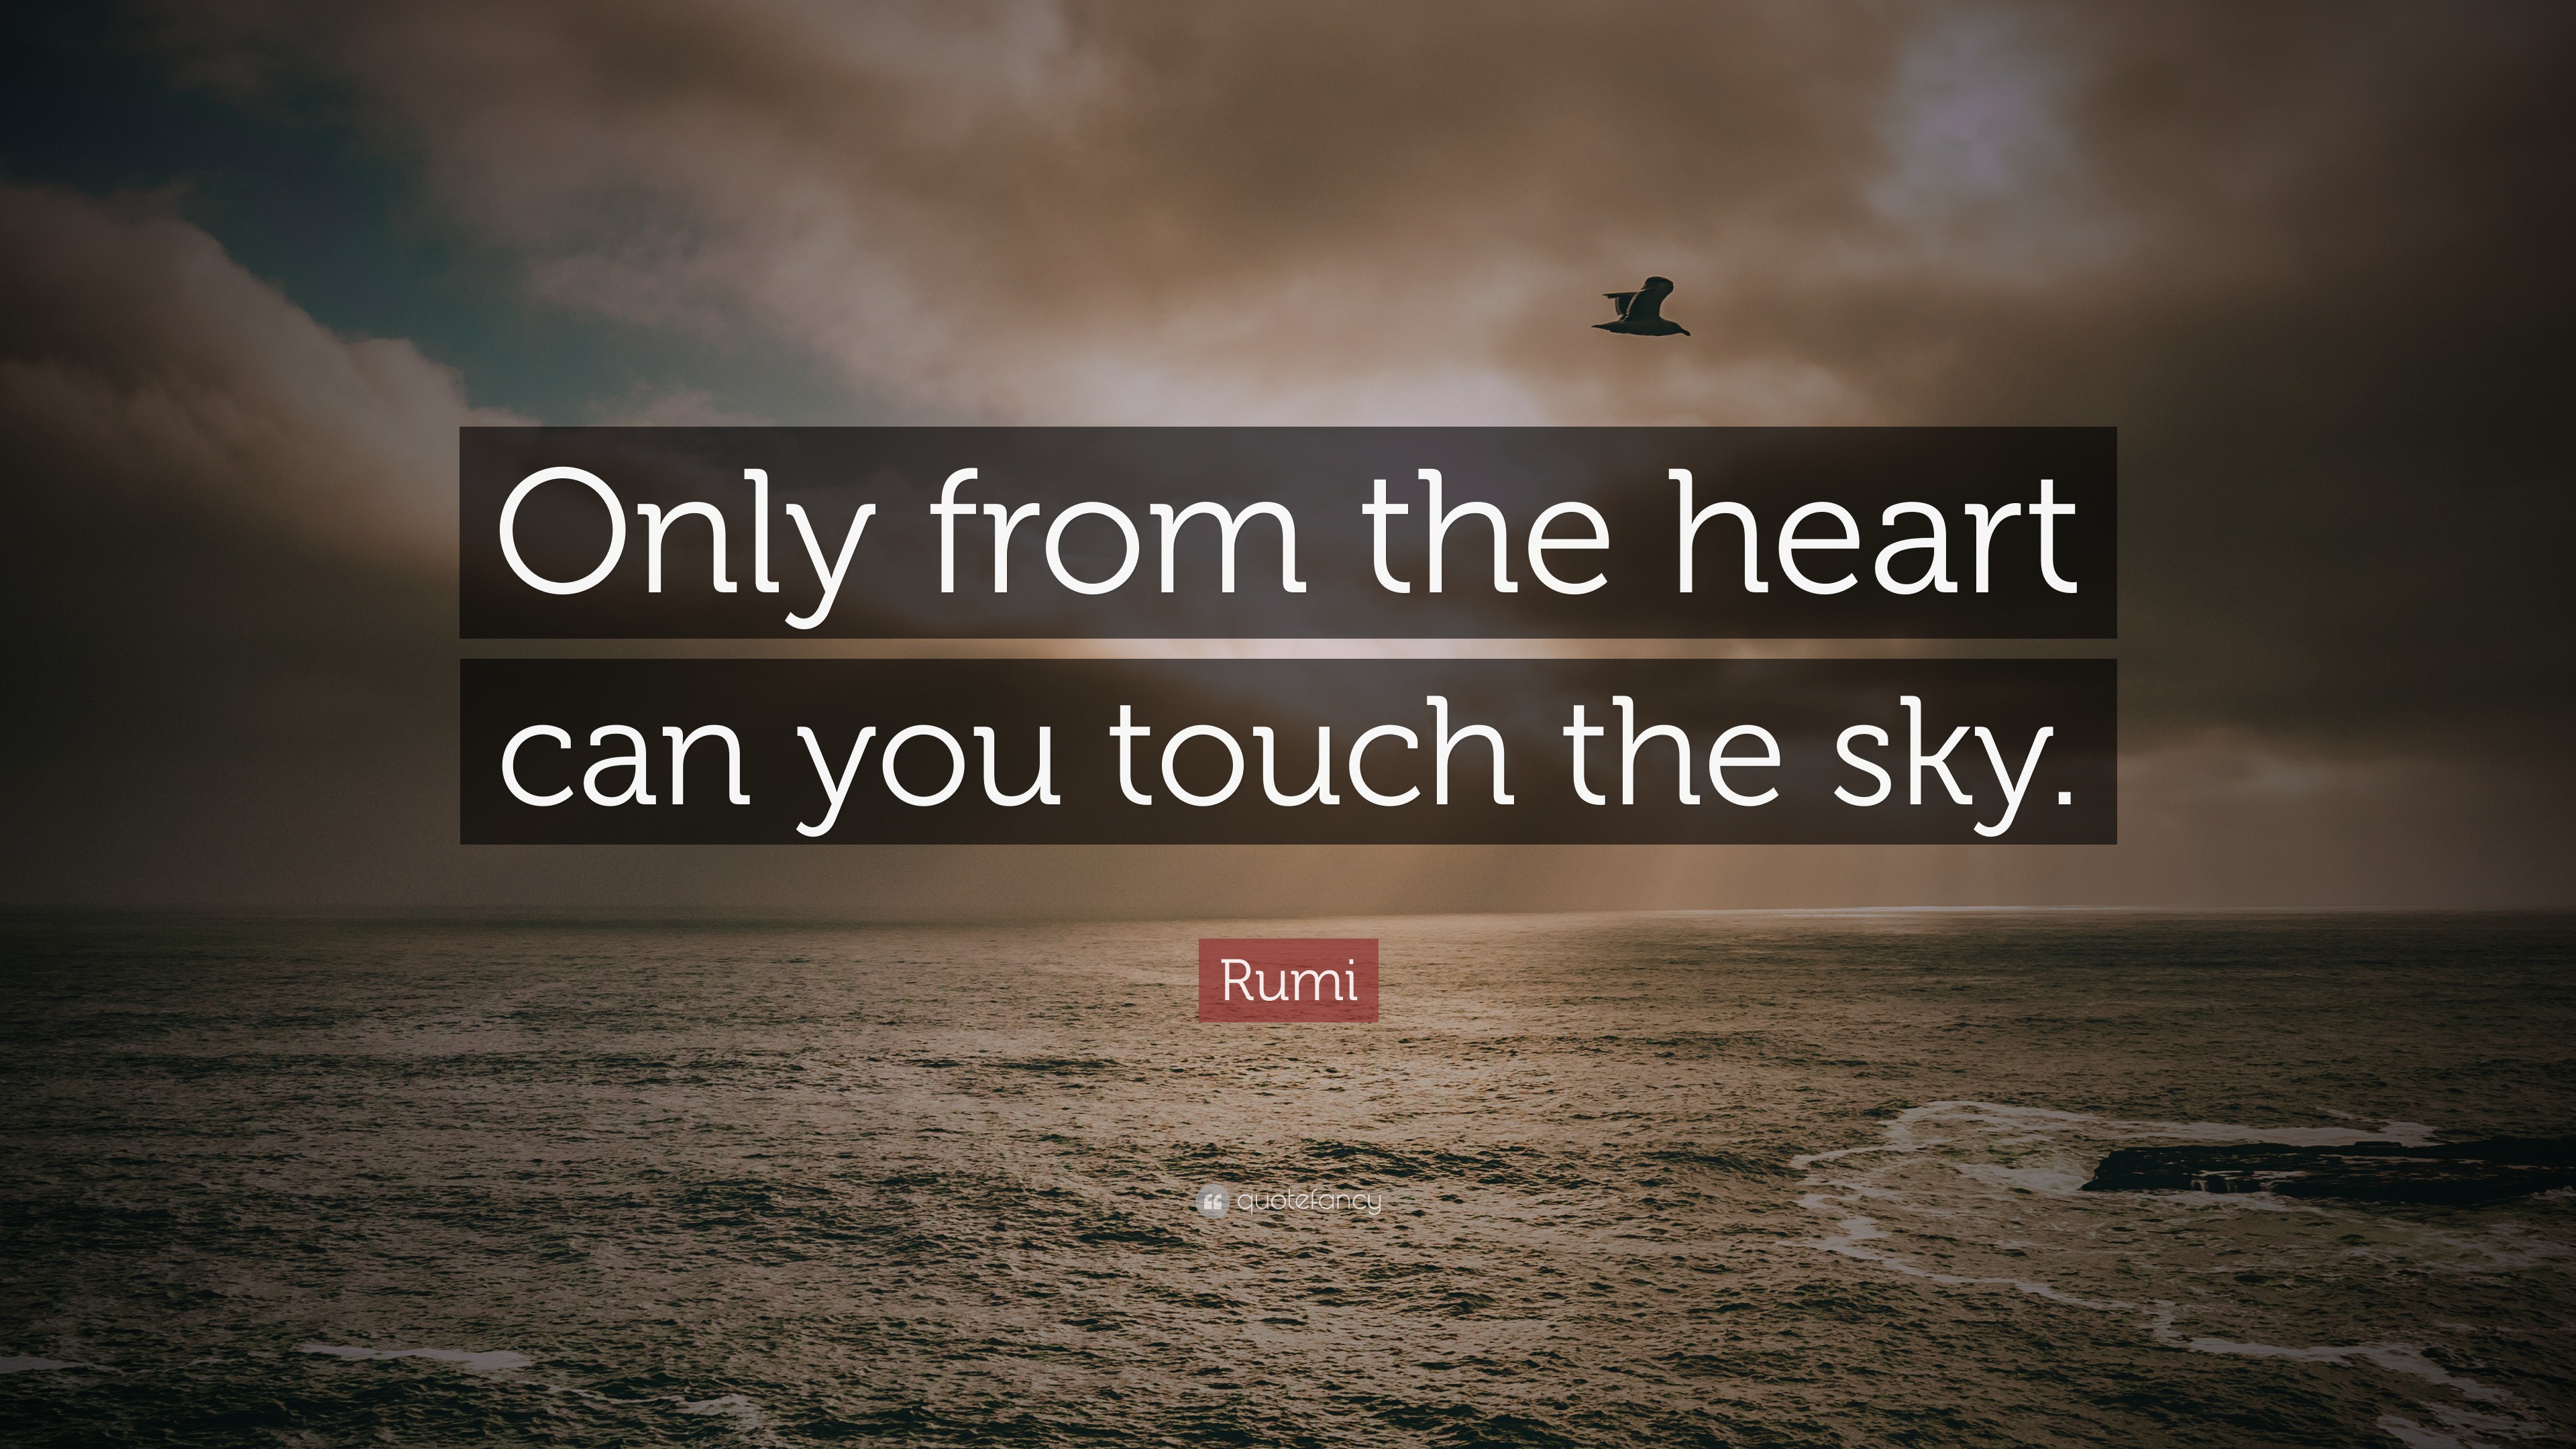 Rumi Quote “Only from the heart can you touch the sky.”